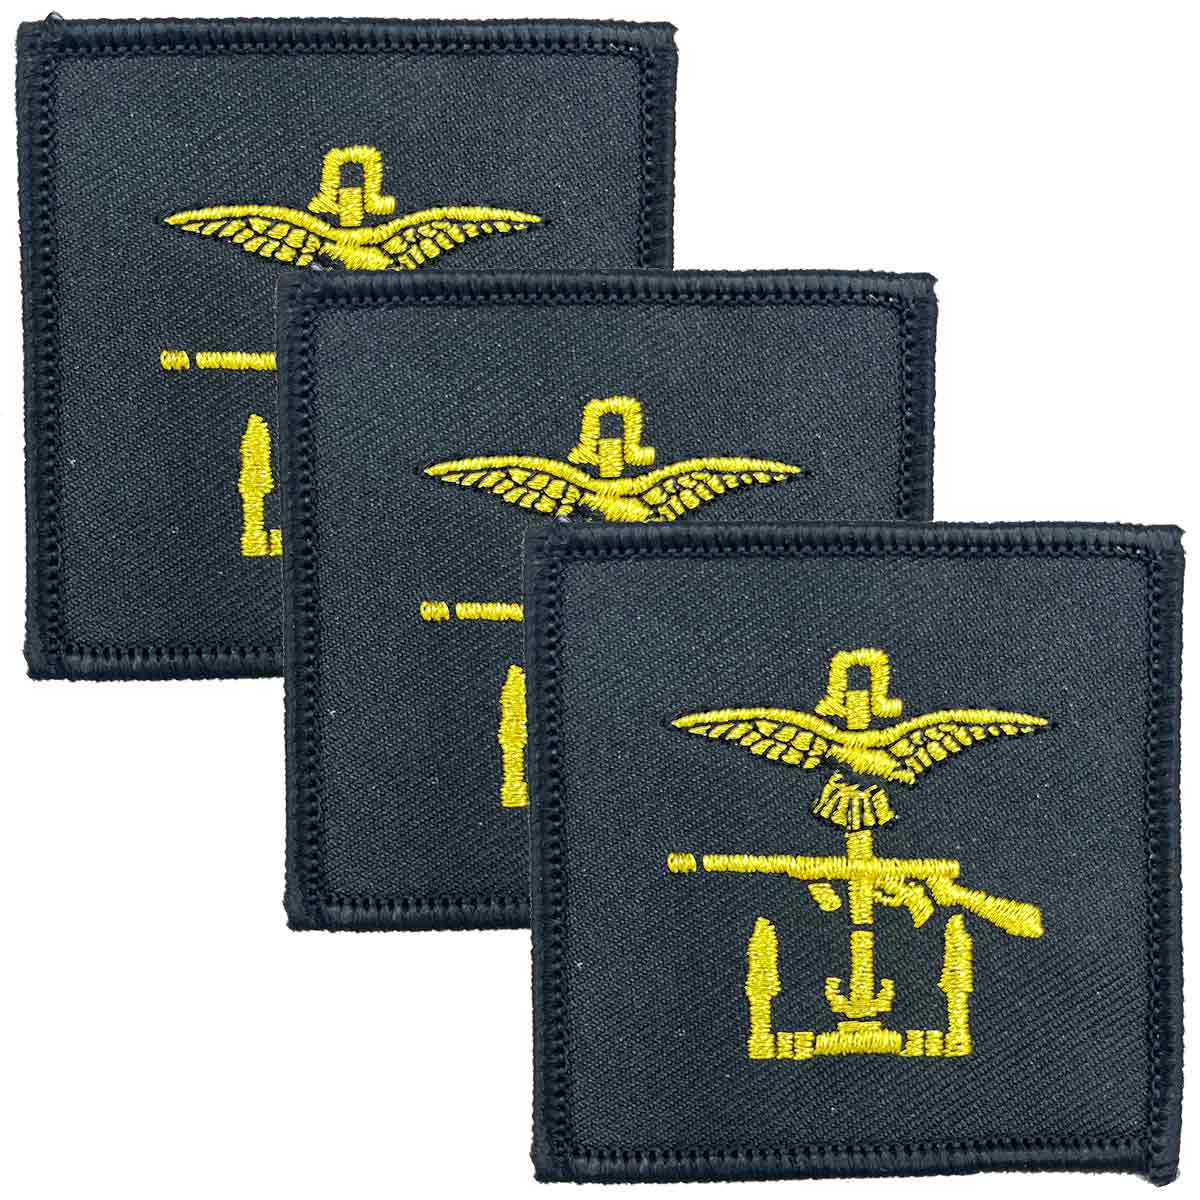 Joint Forces Command TRF - Sew on Patch - John Bull Clothing